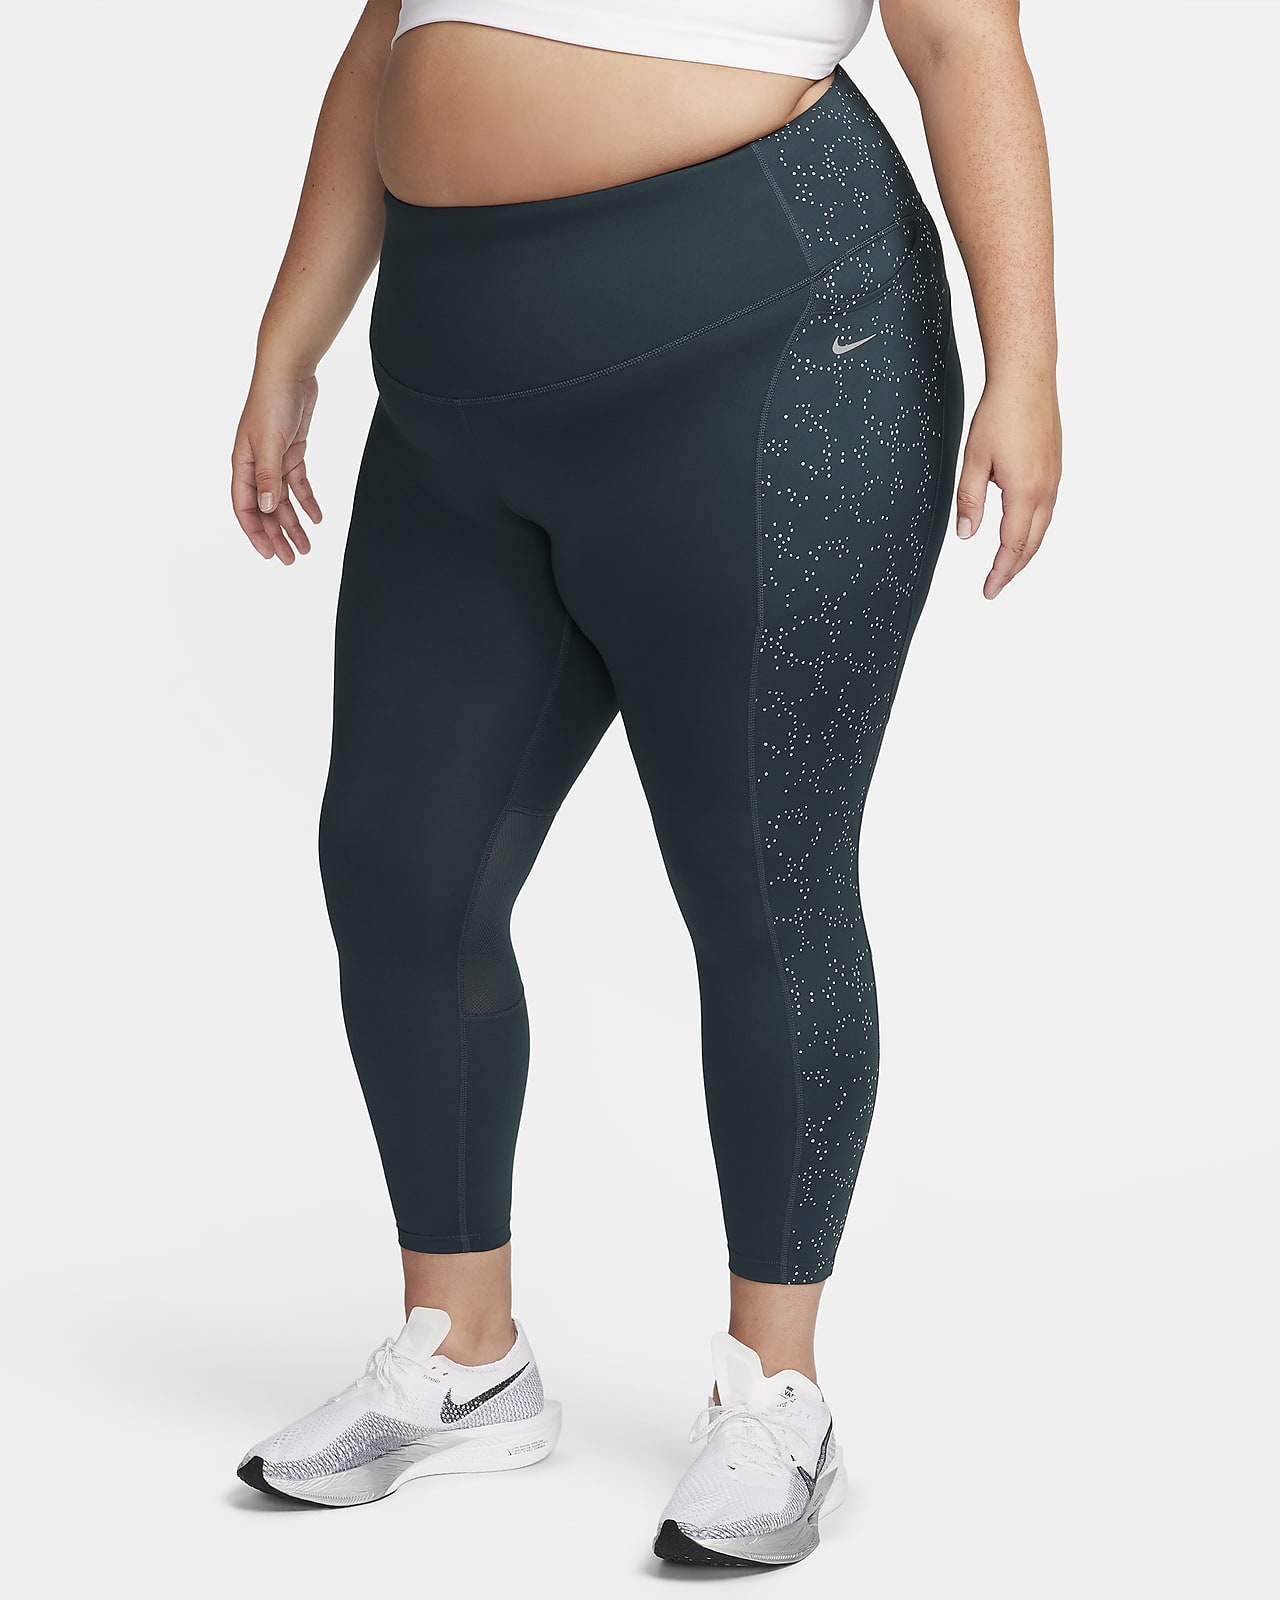 Nike Fast Women's Mid-Rise 7/8 Printed Leggings with Pockets (Plus Size).